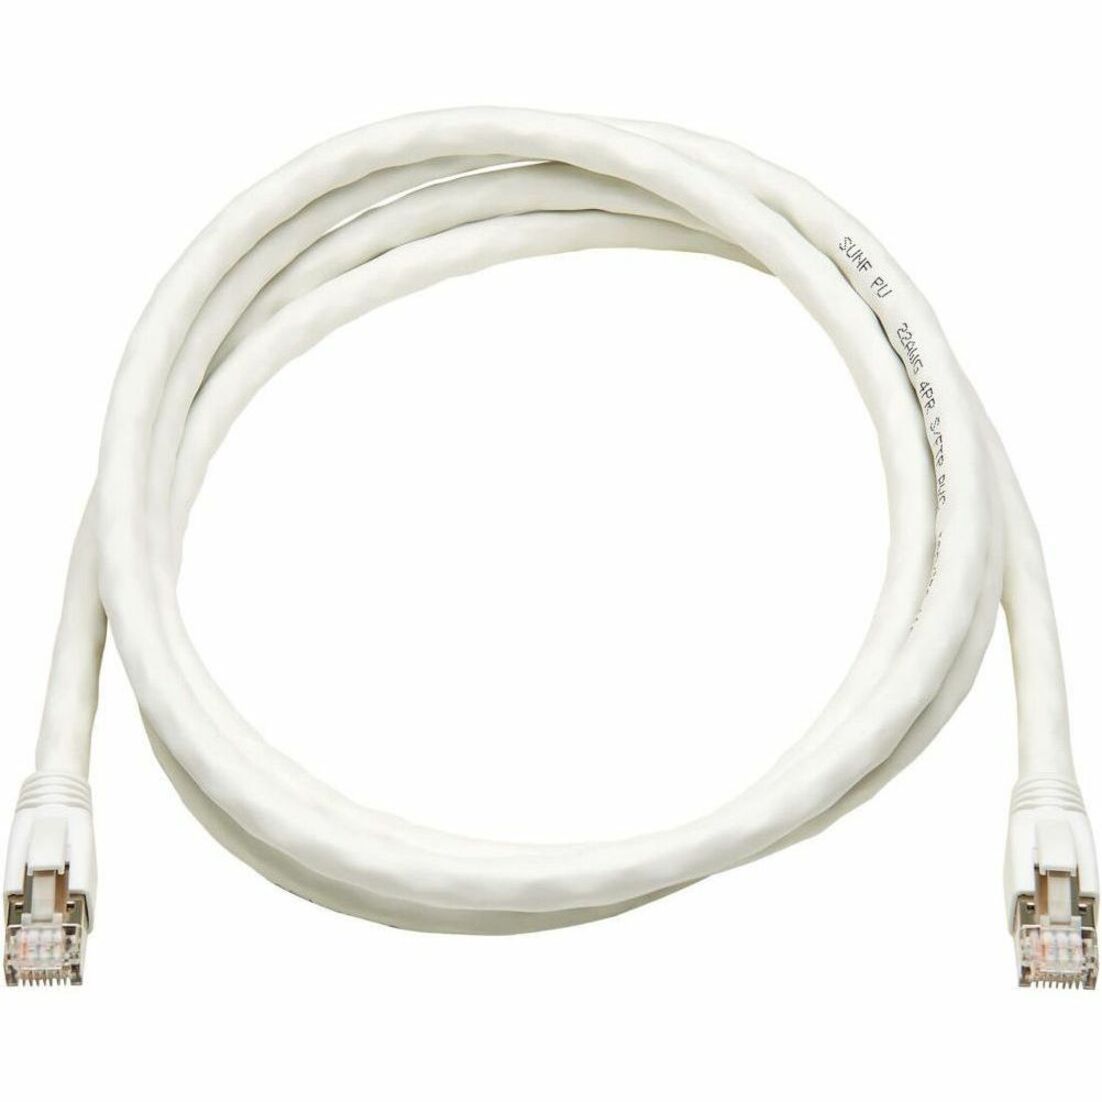 Tripp Lite N272-F05-WH Cat8 40G Snagless SSTP Ethernet Cable (RJ45 M/M), PoE, White, 5 ft. (1.5 m)